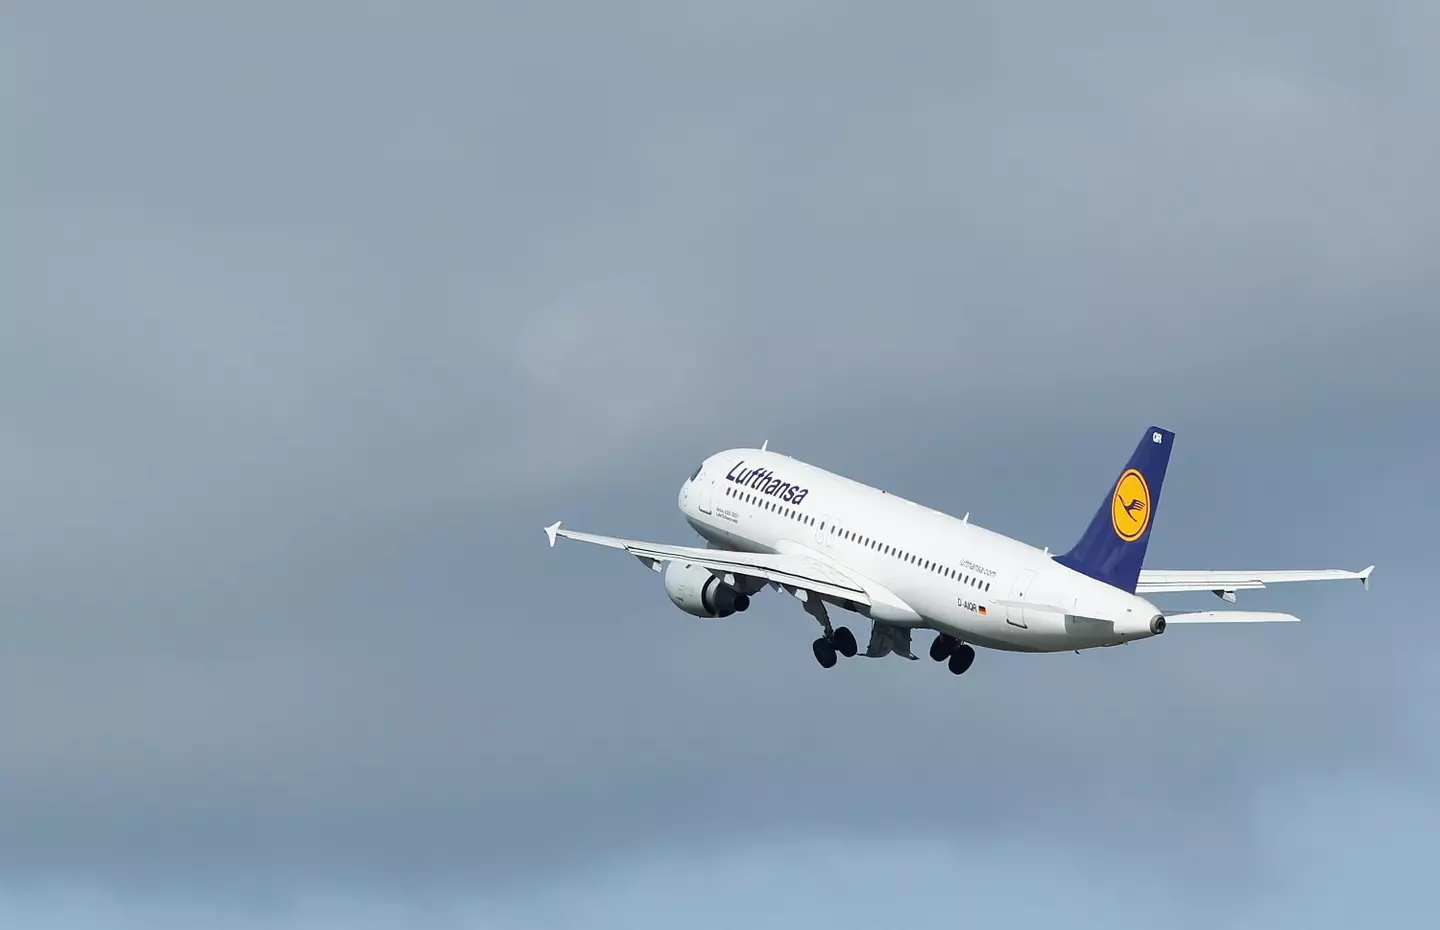 The Lufthansa CEO says the shift gave him ideas about what needs changing.